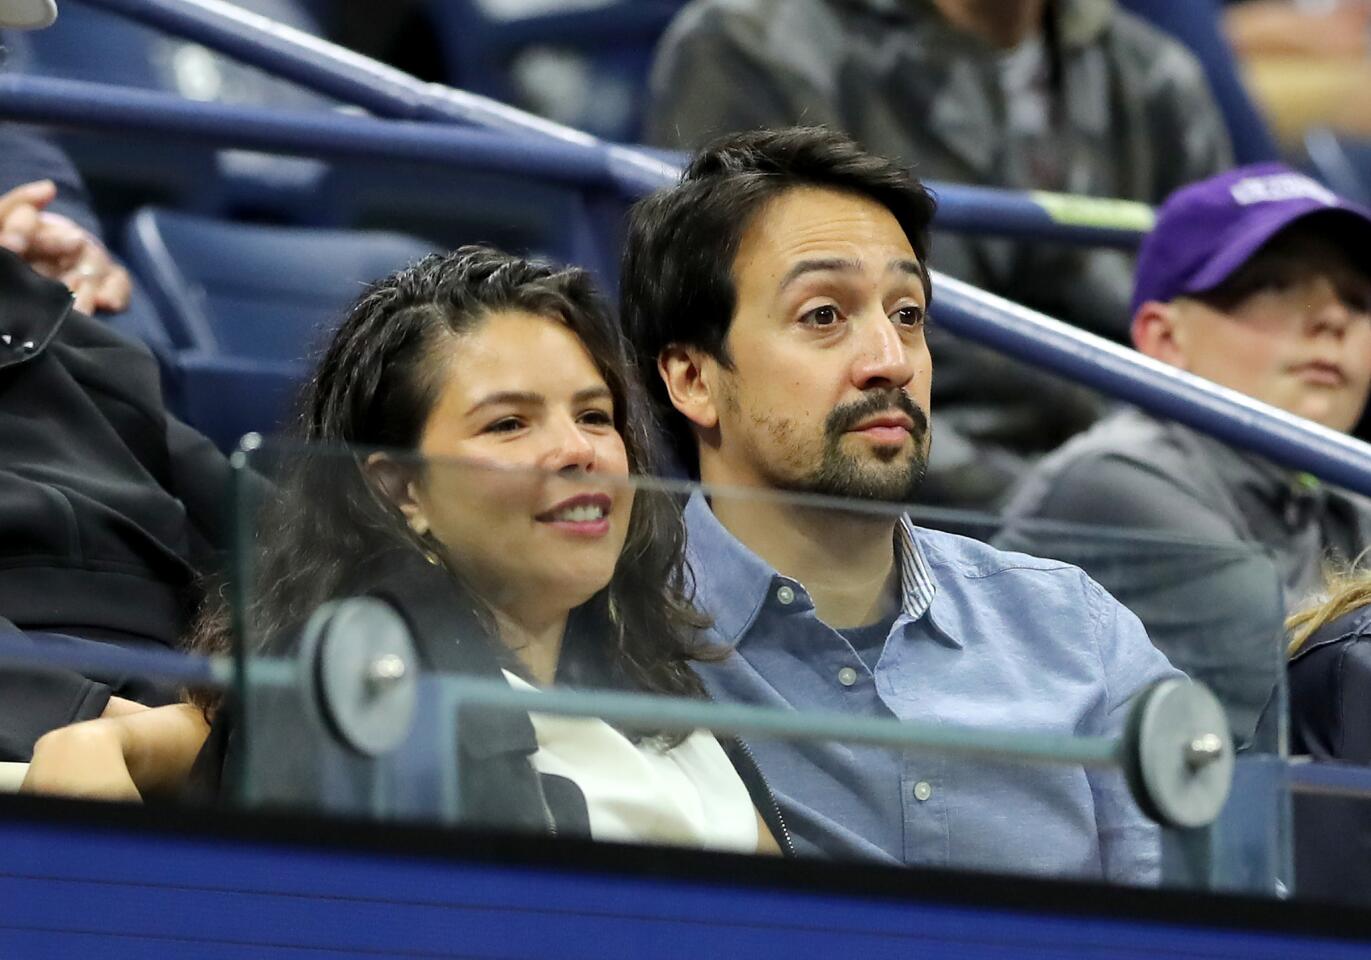 Lin-Manuel Miranda (r.) and wife Vanessa Nadal attend the Men's Singles semi-final match between Daniil Medvedev of Russia and Grigor Dimitrov of Bulgaria on day 12 of the 2019 US Open on Sept. 6, 2019 in Queens, New York.